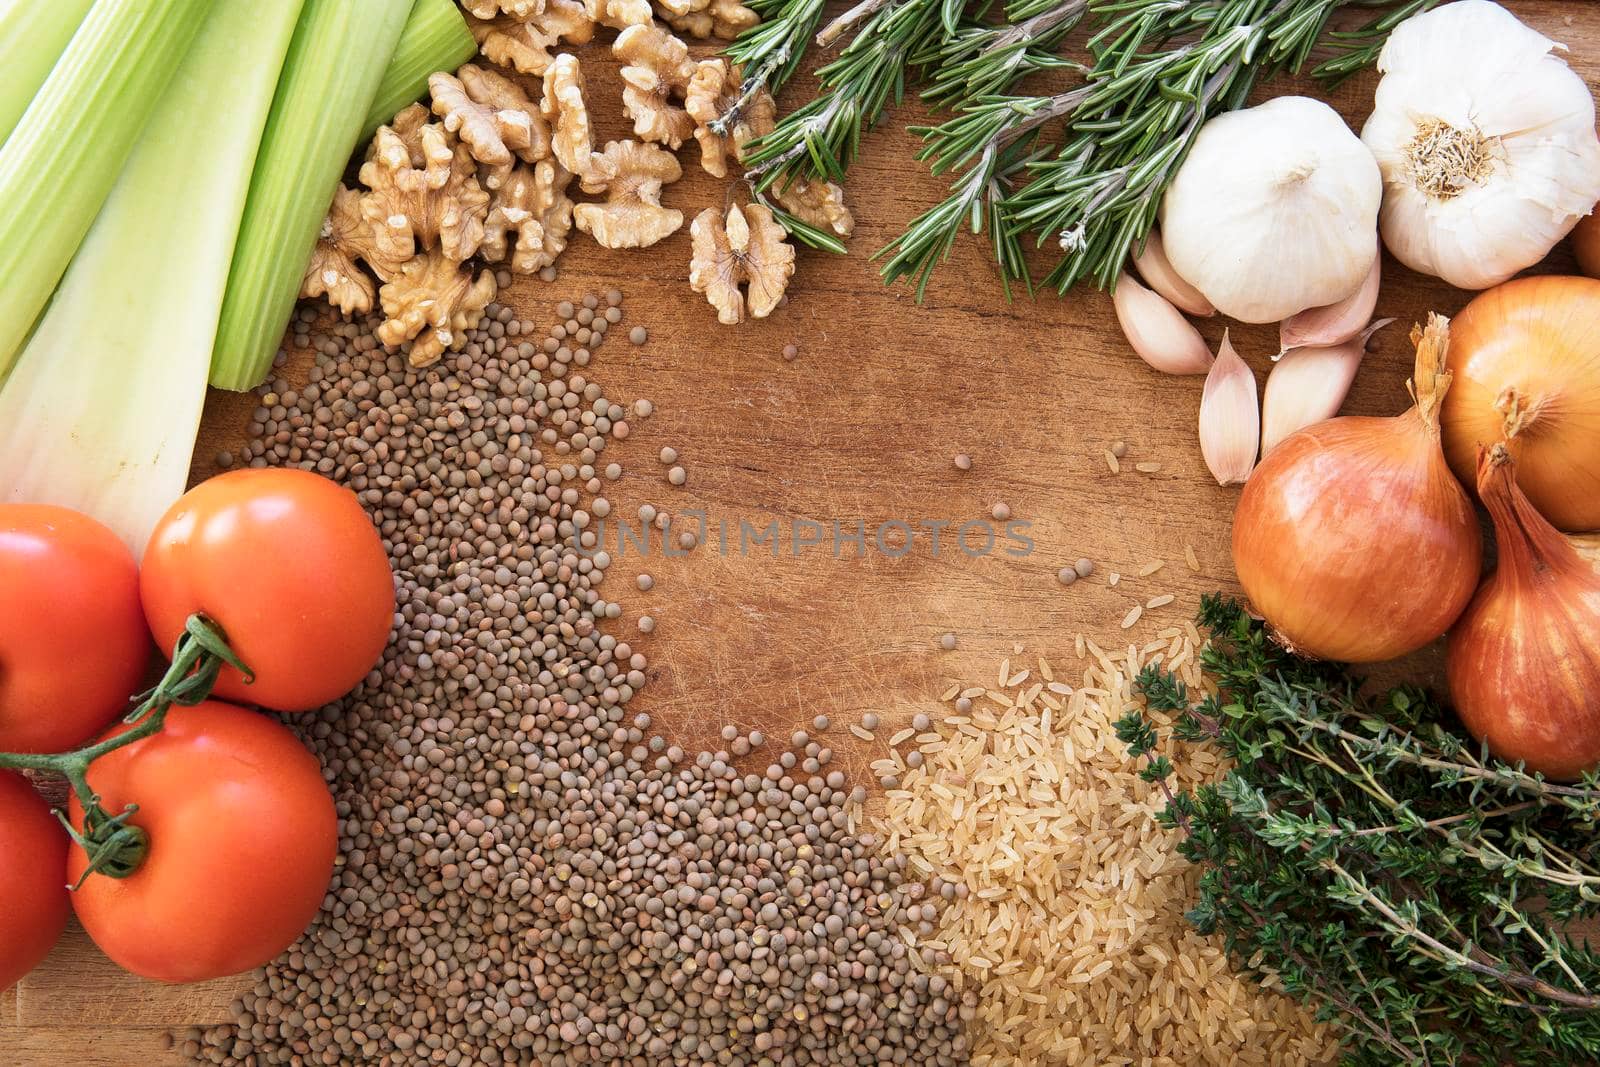 Healthy food frame with fresh vegetables, herbs and grains on rustic wooden background viewed from above.